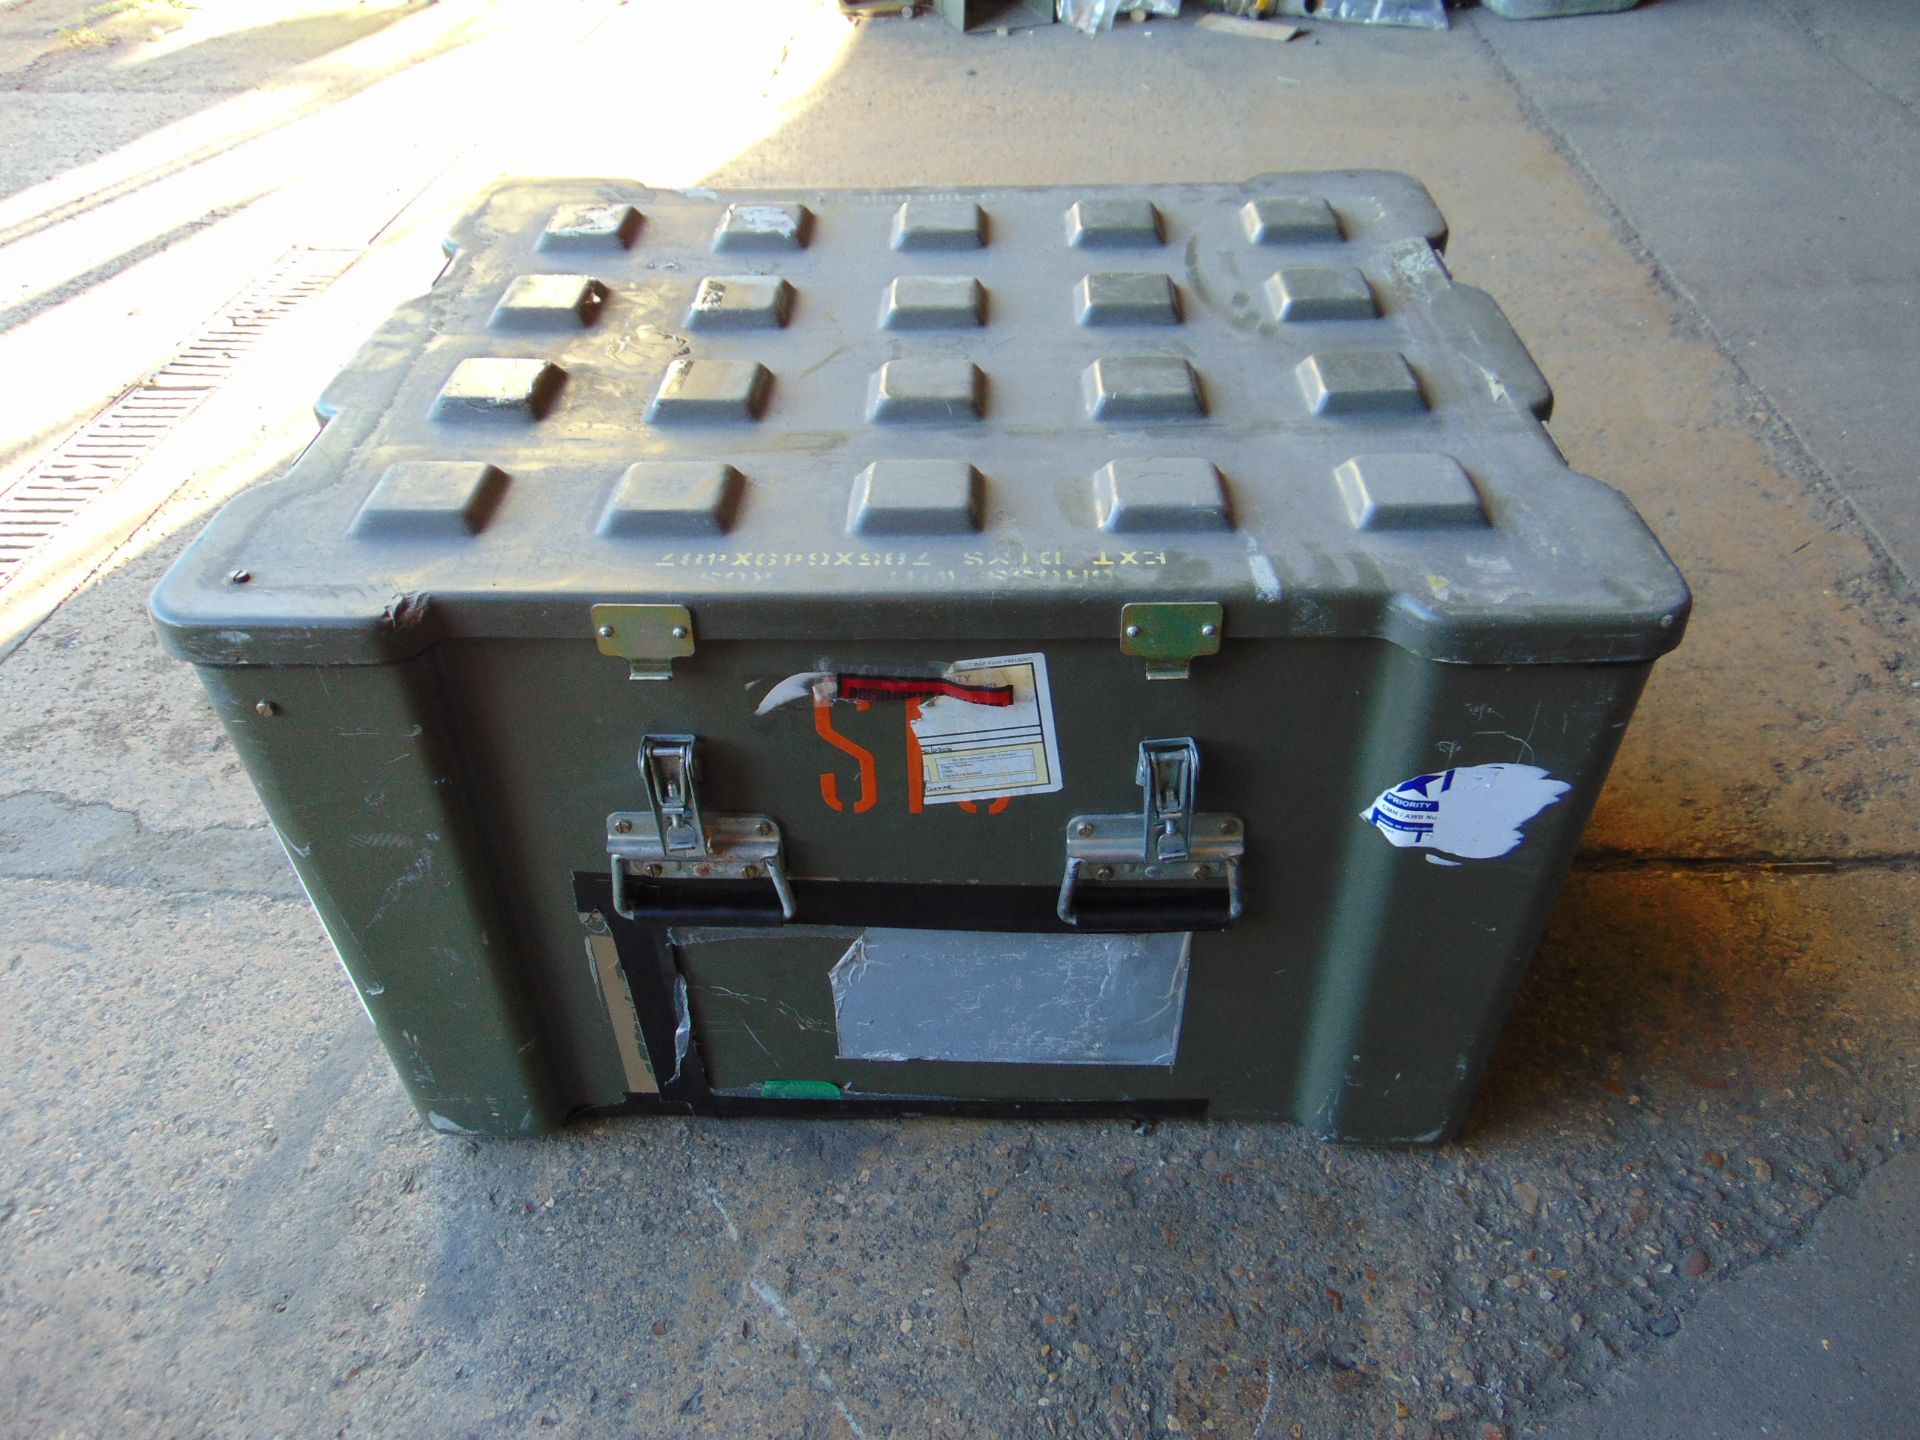 British Army Protective Transport Case